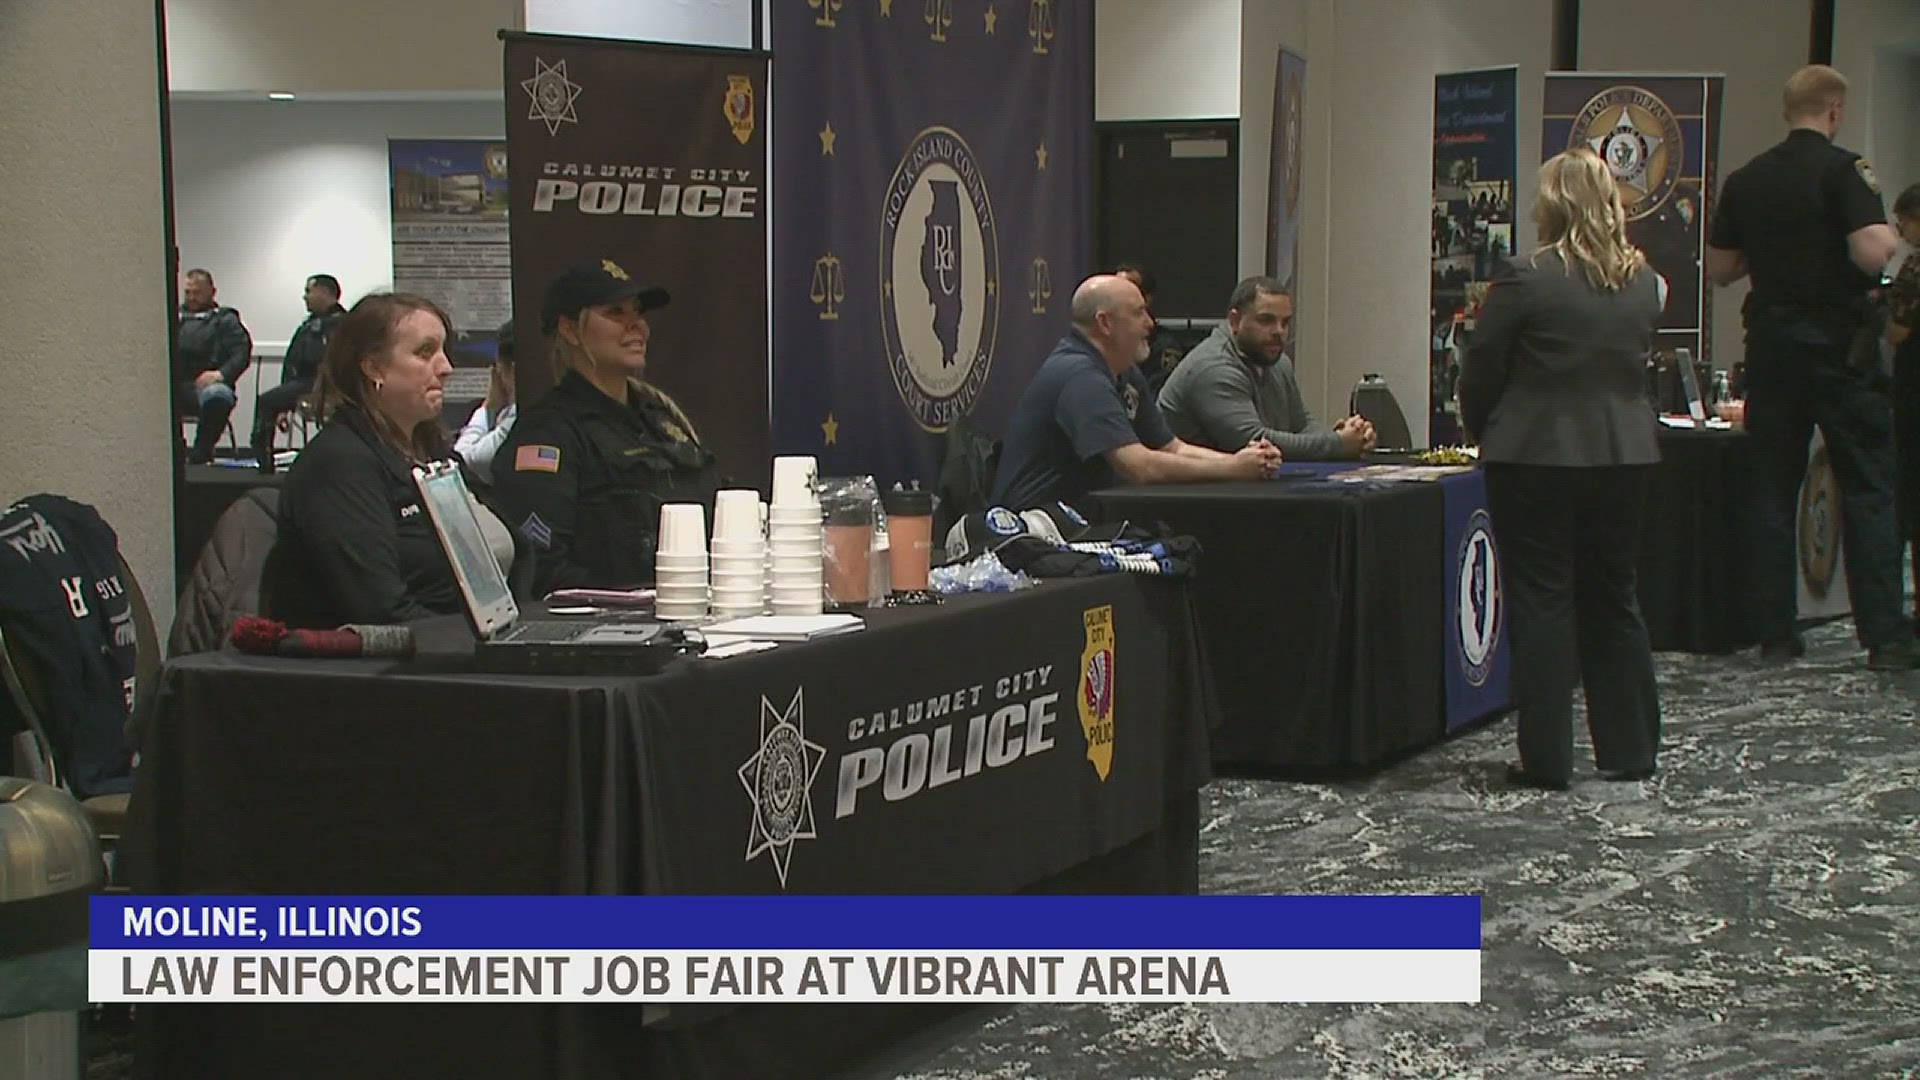 This was the first recruitment fair by the Illinois Fraternal Order of Police, with over 35 departments in Iowa and Illinois attending.